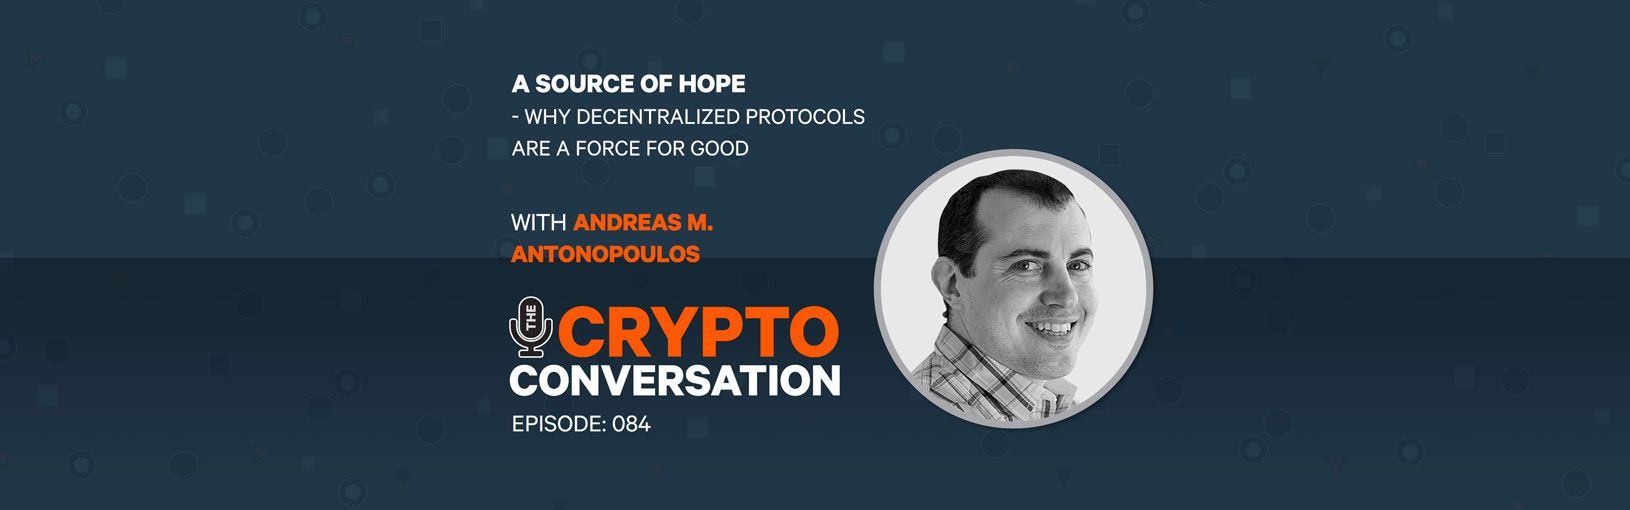 Andreas M. Antonopoulos – Why decentralized protocols are a force for good